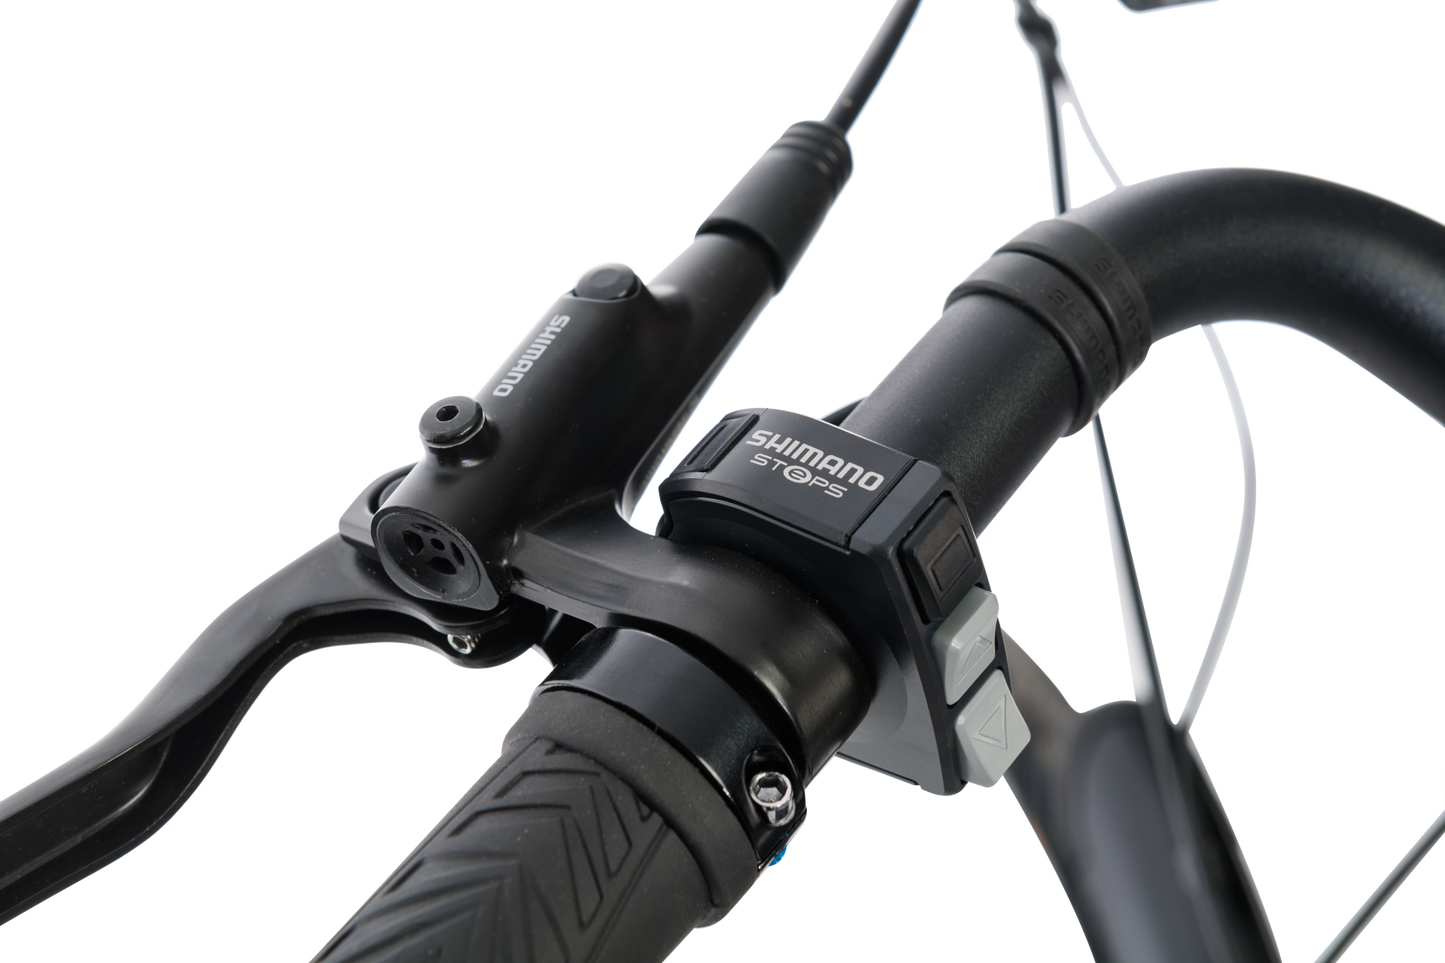 Adventure eBike in Charcoal showing Shimano controls from Reid Cycles Australia 